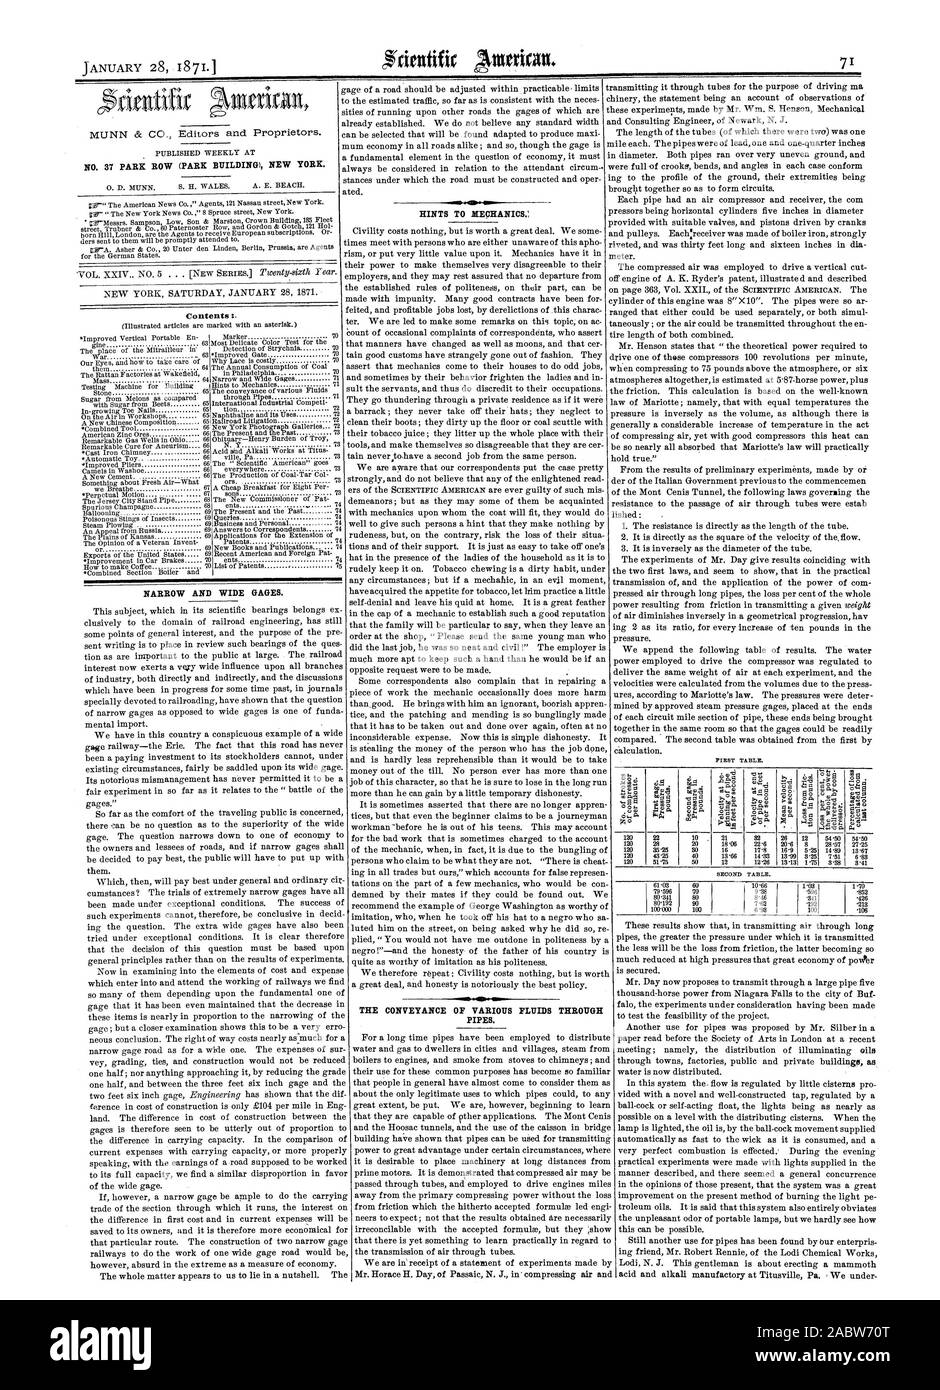 PUBLISHED WEEKLY AT NO. 37 PARK ROW (PARK BUILDING) NEW YORK. Contents :. (Illustrated articles are marked with an asterisk.) Improved Vertical Portable En Marker glue 63 Most Delicate Color Test for the War  63 Improved Gate Our Eyes and how to take care of Why Lace is costly them.  64 The Annual Consumption of Coal Testing Machine for Building Hints to Mechanics American Zinc Ores 66 The Present and the Past 73 Remarkable Gas Wells in Ohio. 66 Obituary—Henry Burden of Troy Remarkable Cure for Aneurism 66 N. Y 73 .Automatic Toy 66 ville Pa '73 -Improved Pliers 66 The 'Scientific American Stock Photo